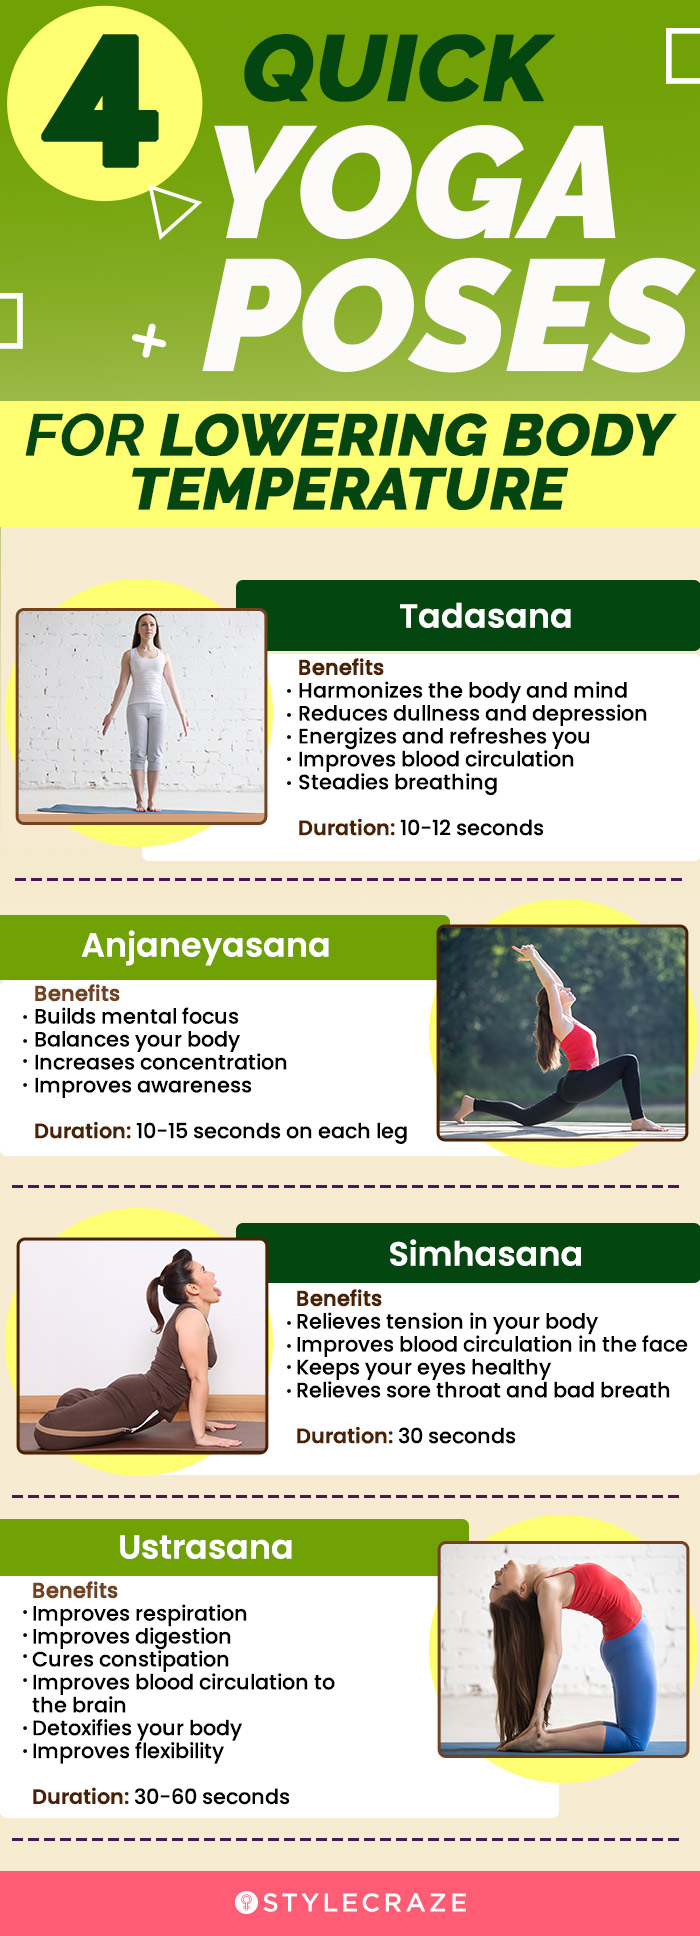 4 quick yoga poses for lowering body temperature (infographic)